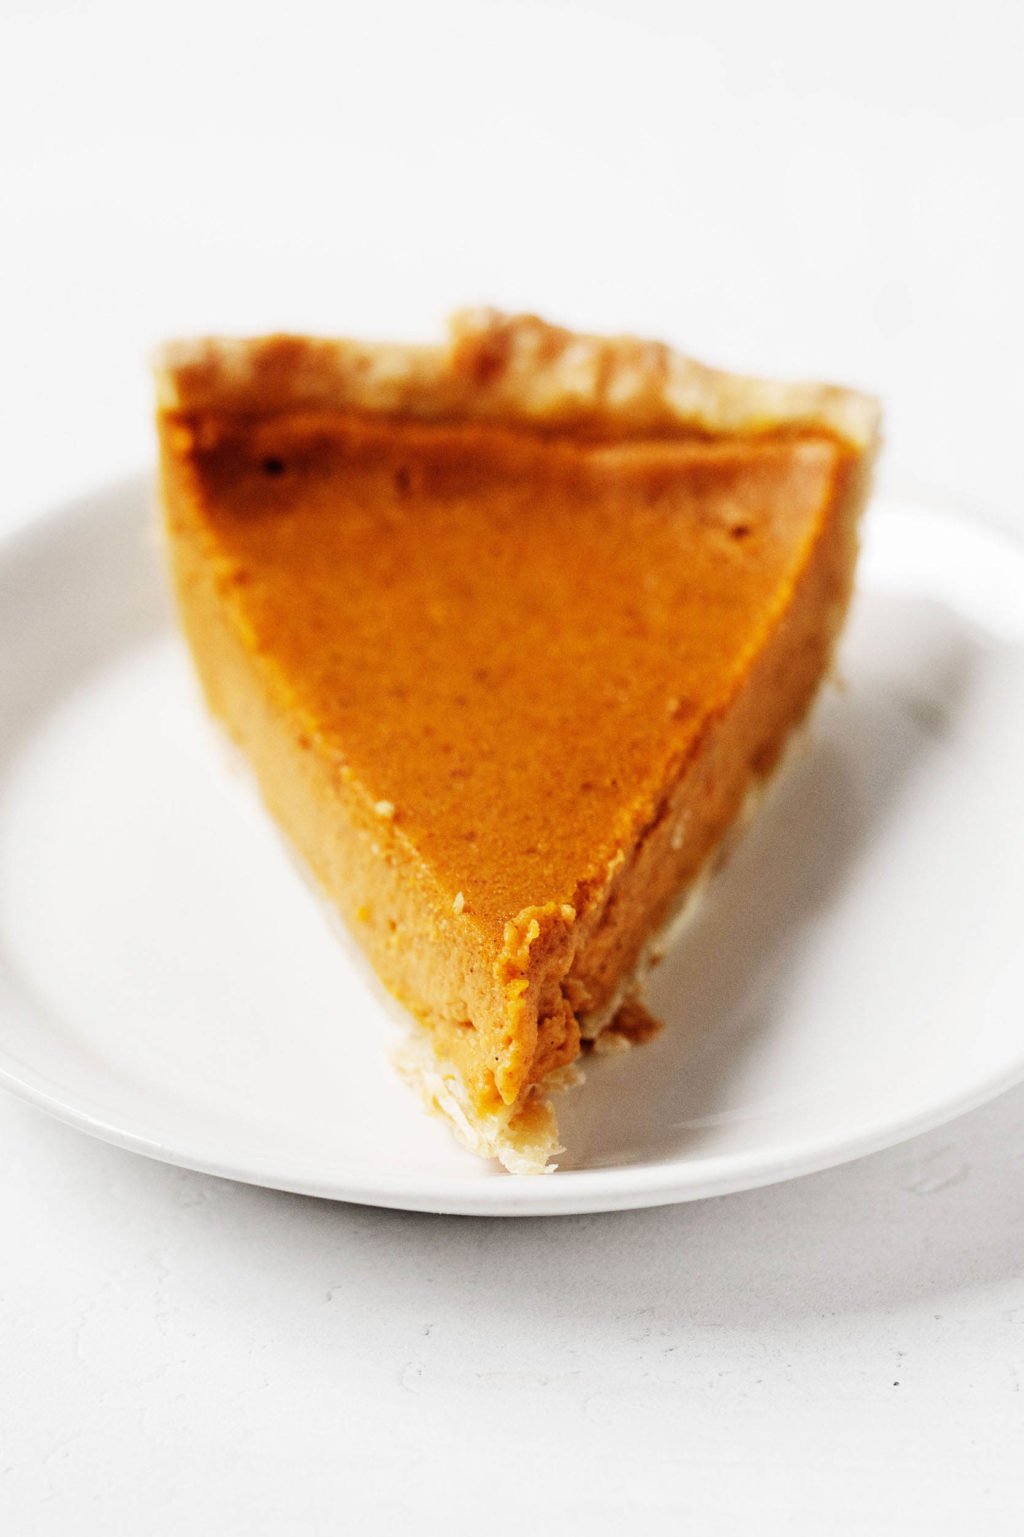 A single slice of pumpkin pie is resting on a small dessert plate on a white surface.